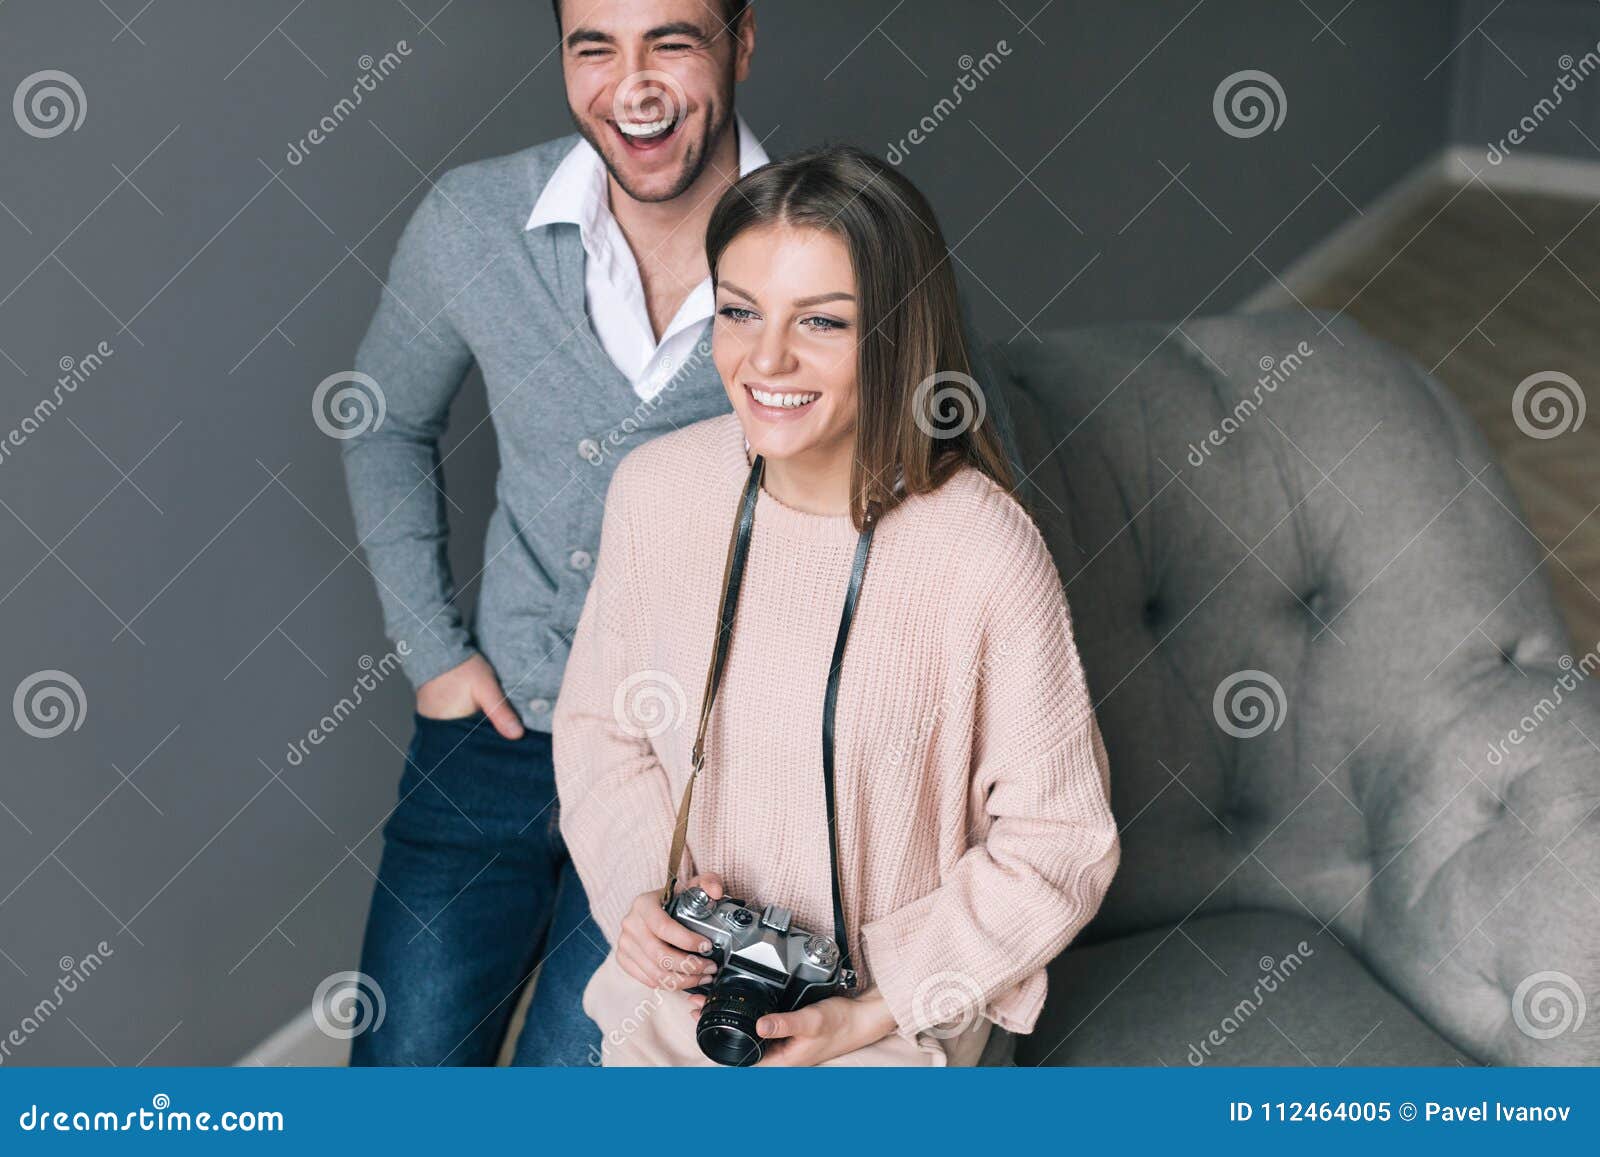 Young Happy Couple At Home Stock Image Image Of Love Indoors 112464005